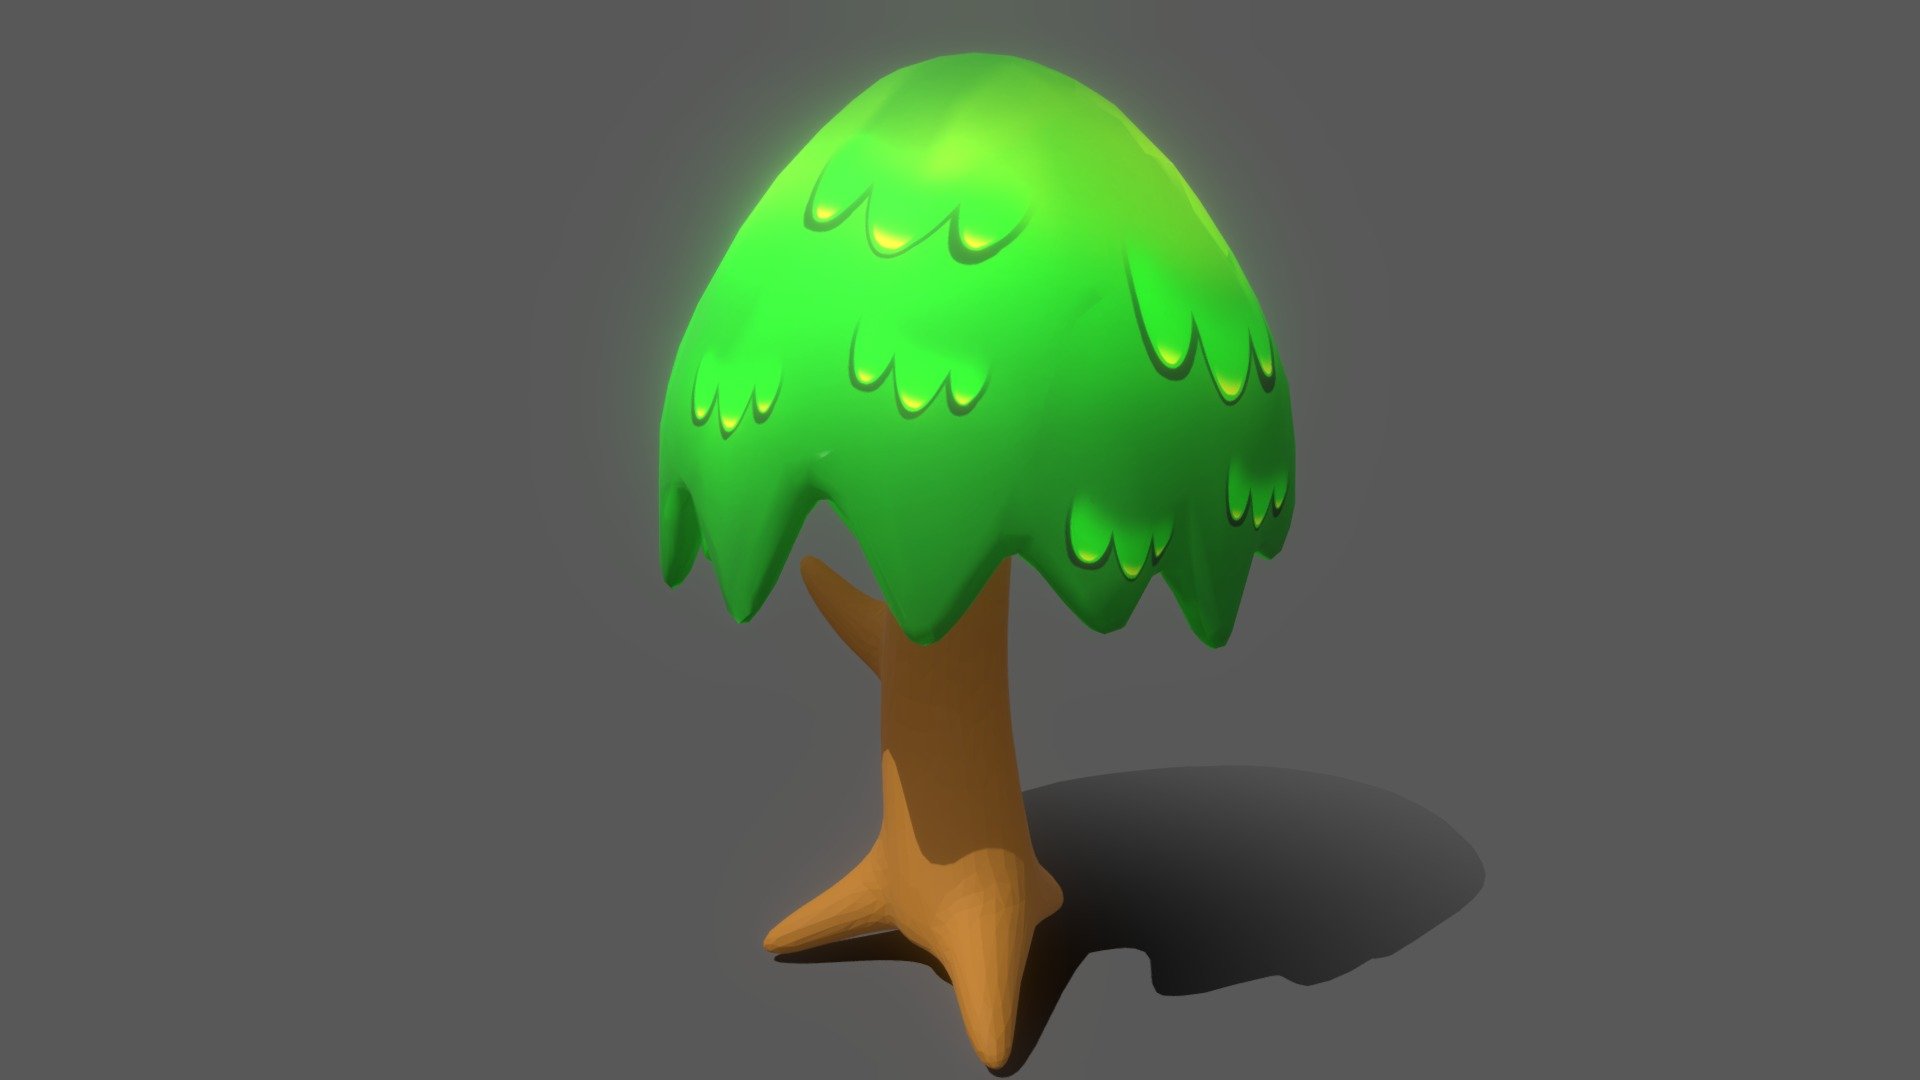 Stylized tree. This was roughly done&hellip; like less than 10 minutes :)

Game engines :

- Backface culling
- Triplanar/worldspace shader for the bark and add your own testure to it - Stylized Tree - Download Free 3D model by Natural_Disbuster (@lemedesign) 3d model